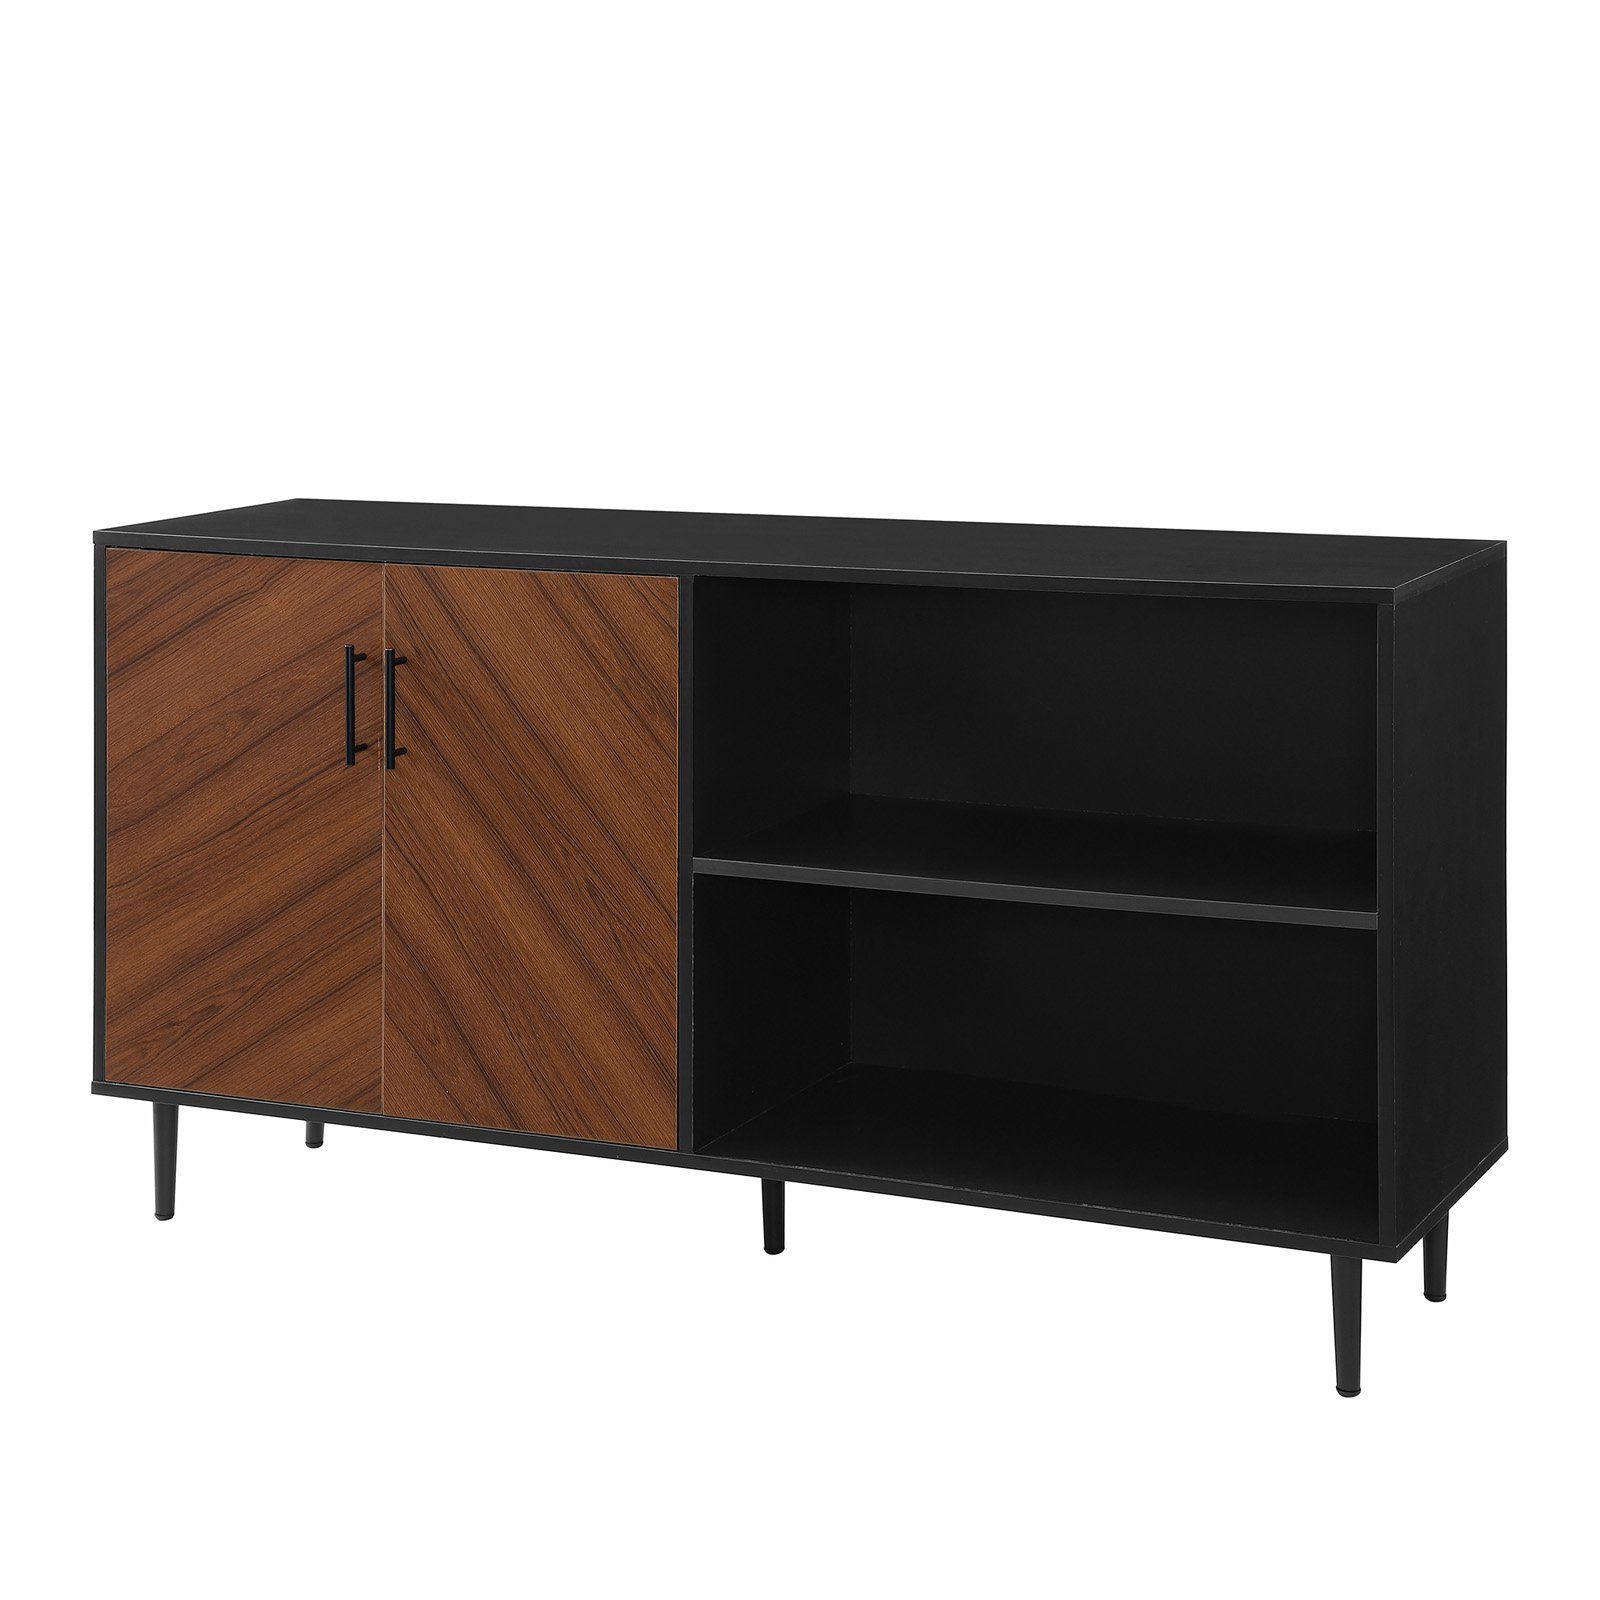 Manor Park Mid Century Modern Asymmetrical Tv Stand | Sleek Storage, Tv With Tv Stands With 2 Doors And 2 Open Shelves (Gallery 9 of 20)